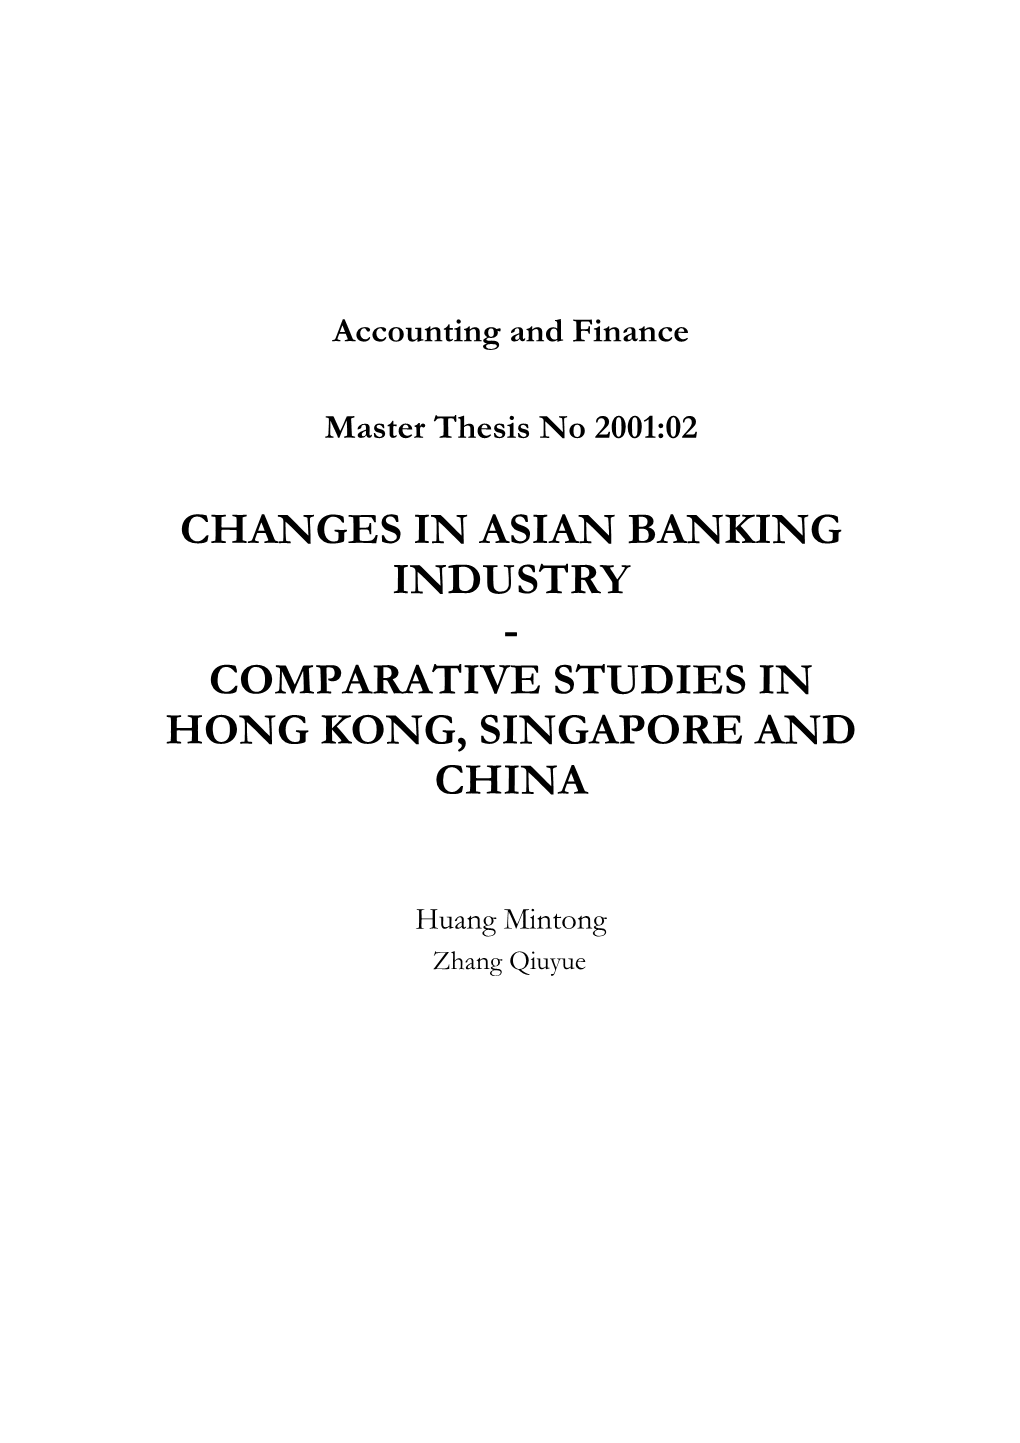 Changes in Asian Banking Industry - Comparative Studies in Hong Kong, Singapore and China